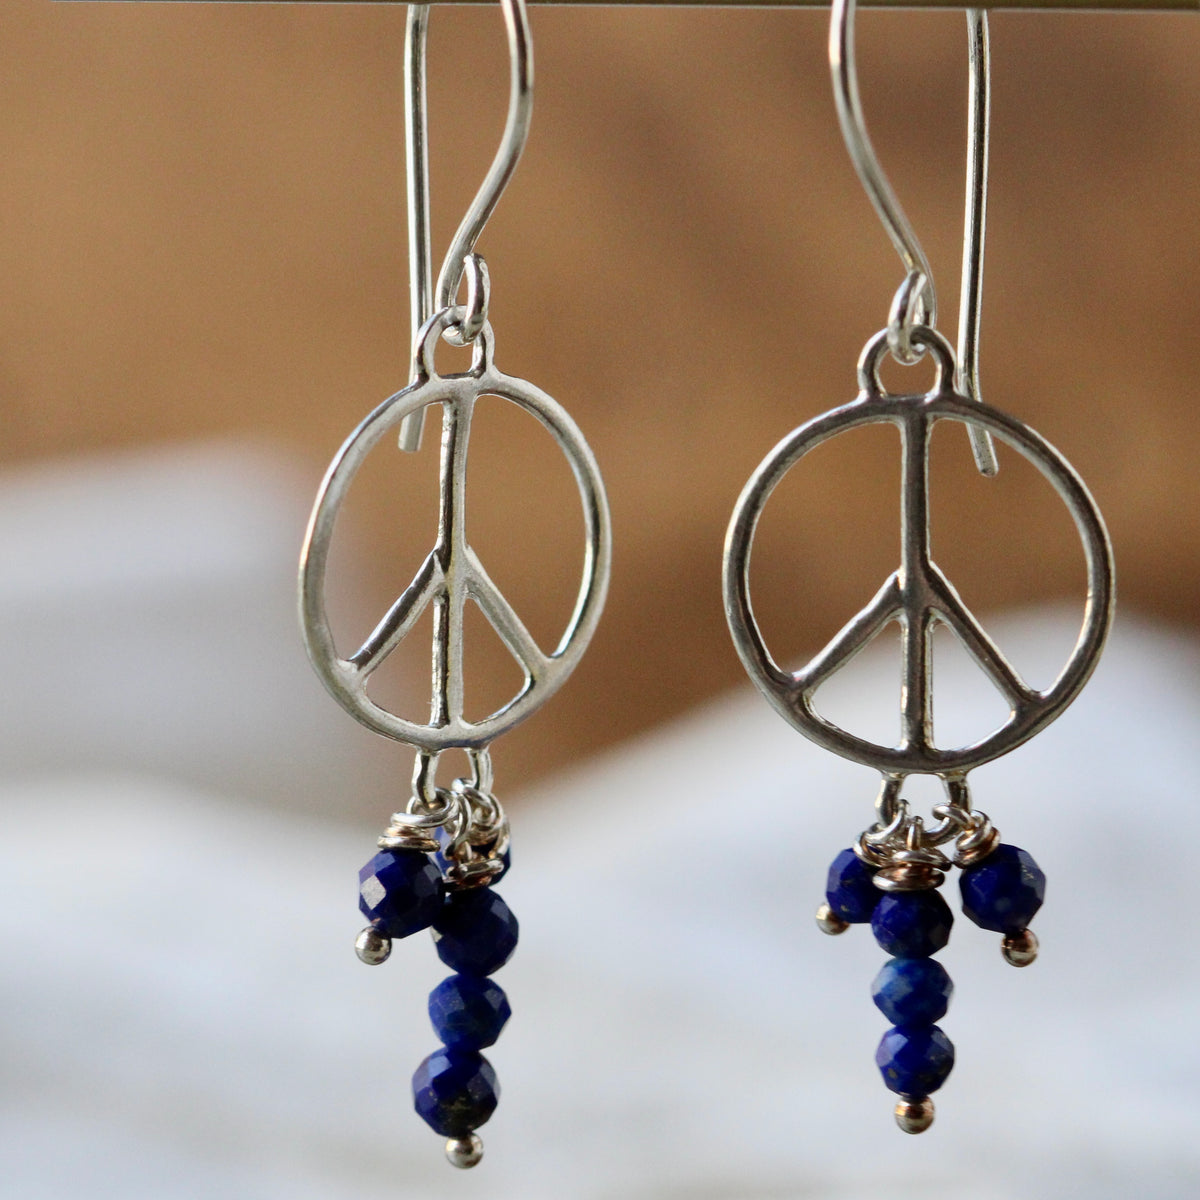 Clearance Sale Peace symbol dangle earrings sterling and Lapis Lazuli